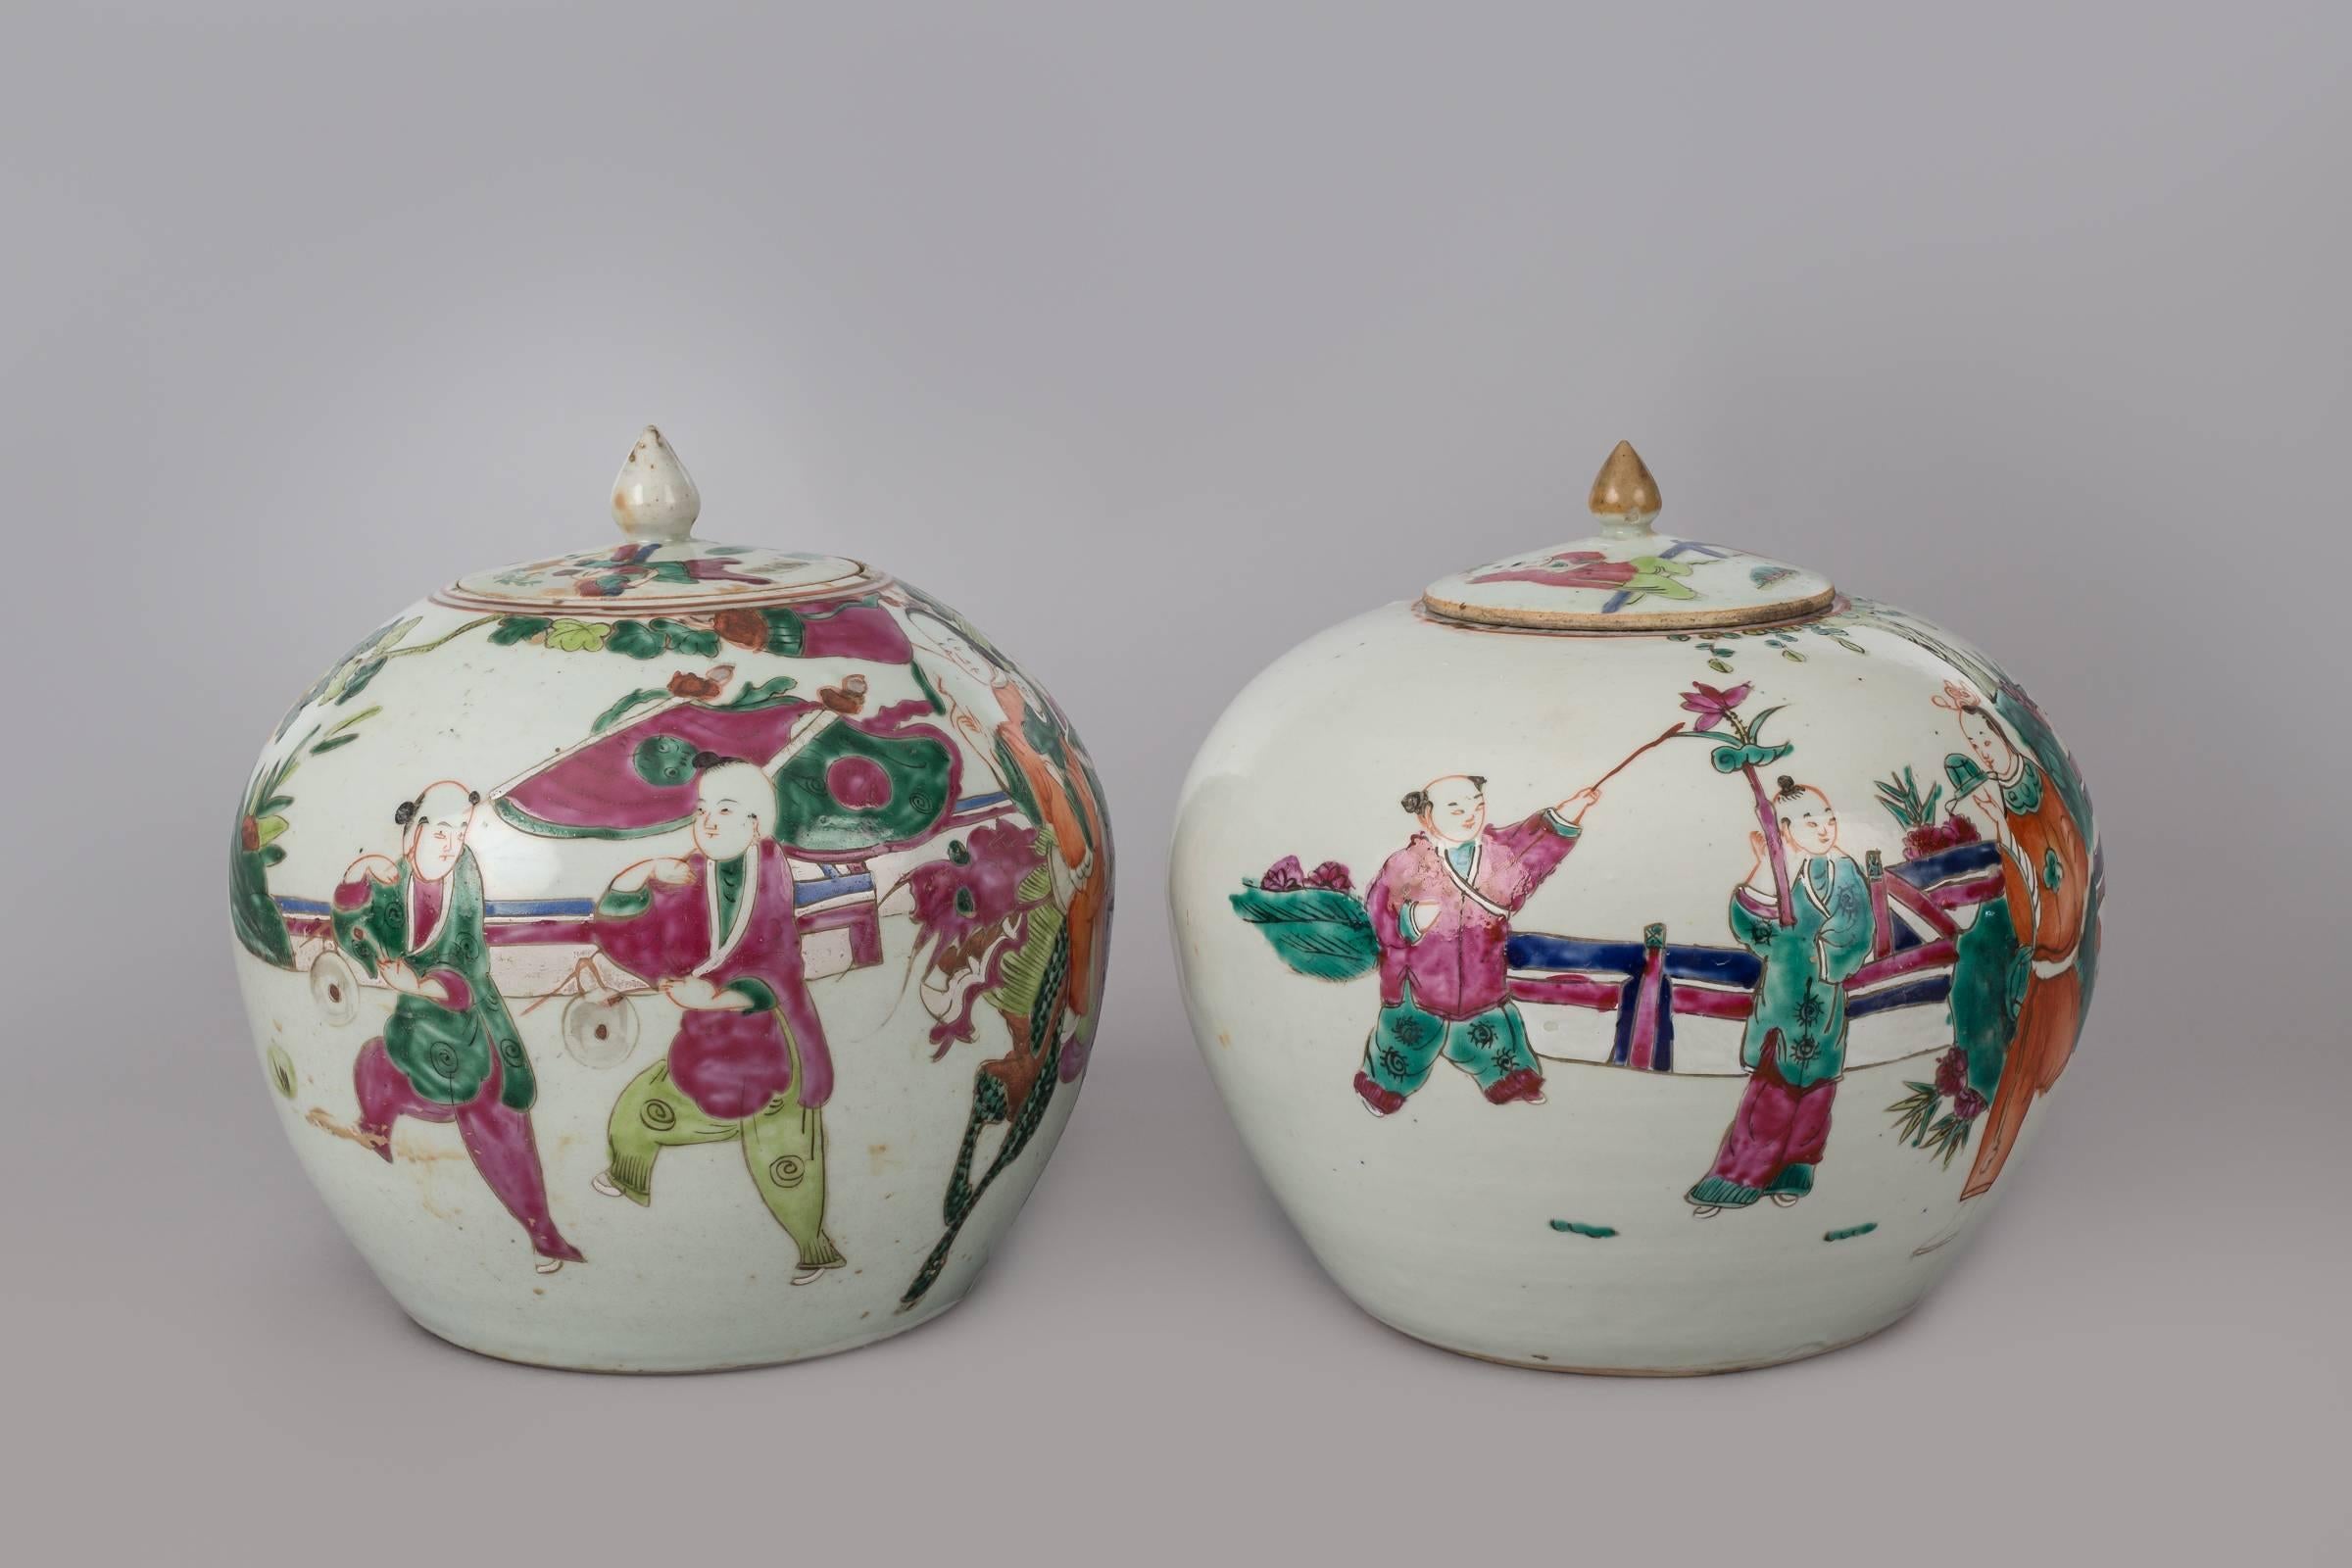 Pair of Chinese porcelain squat lidded vases decorated with figures celebrating the New Year and wearing colorful costumes, three figures are riding a horse and some are flying kites. The backs of the jars are decorated with bats.